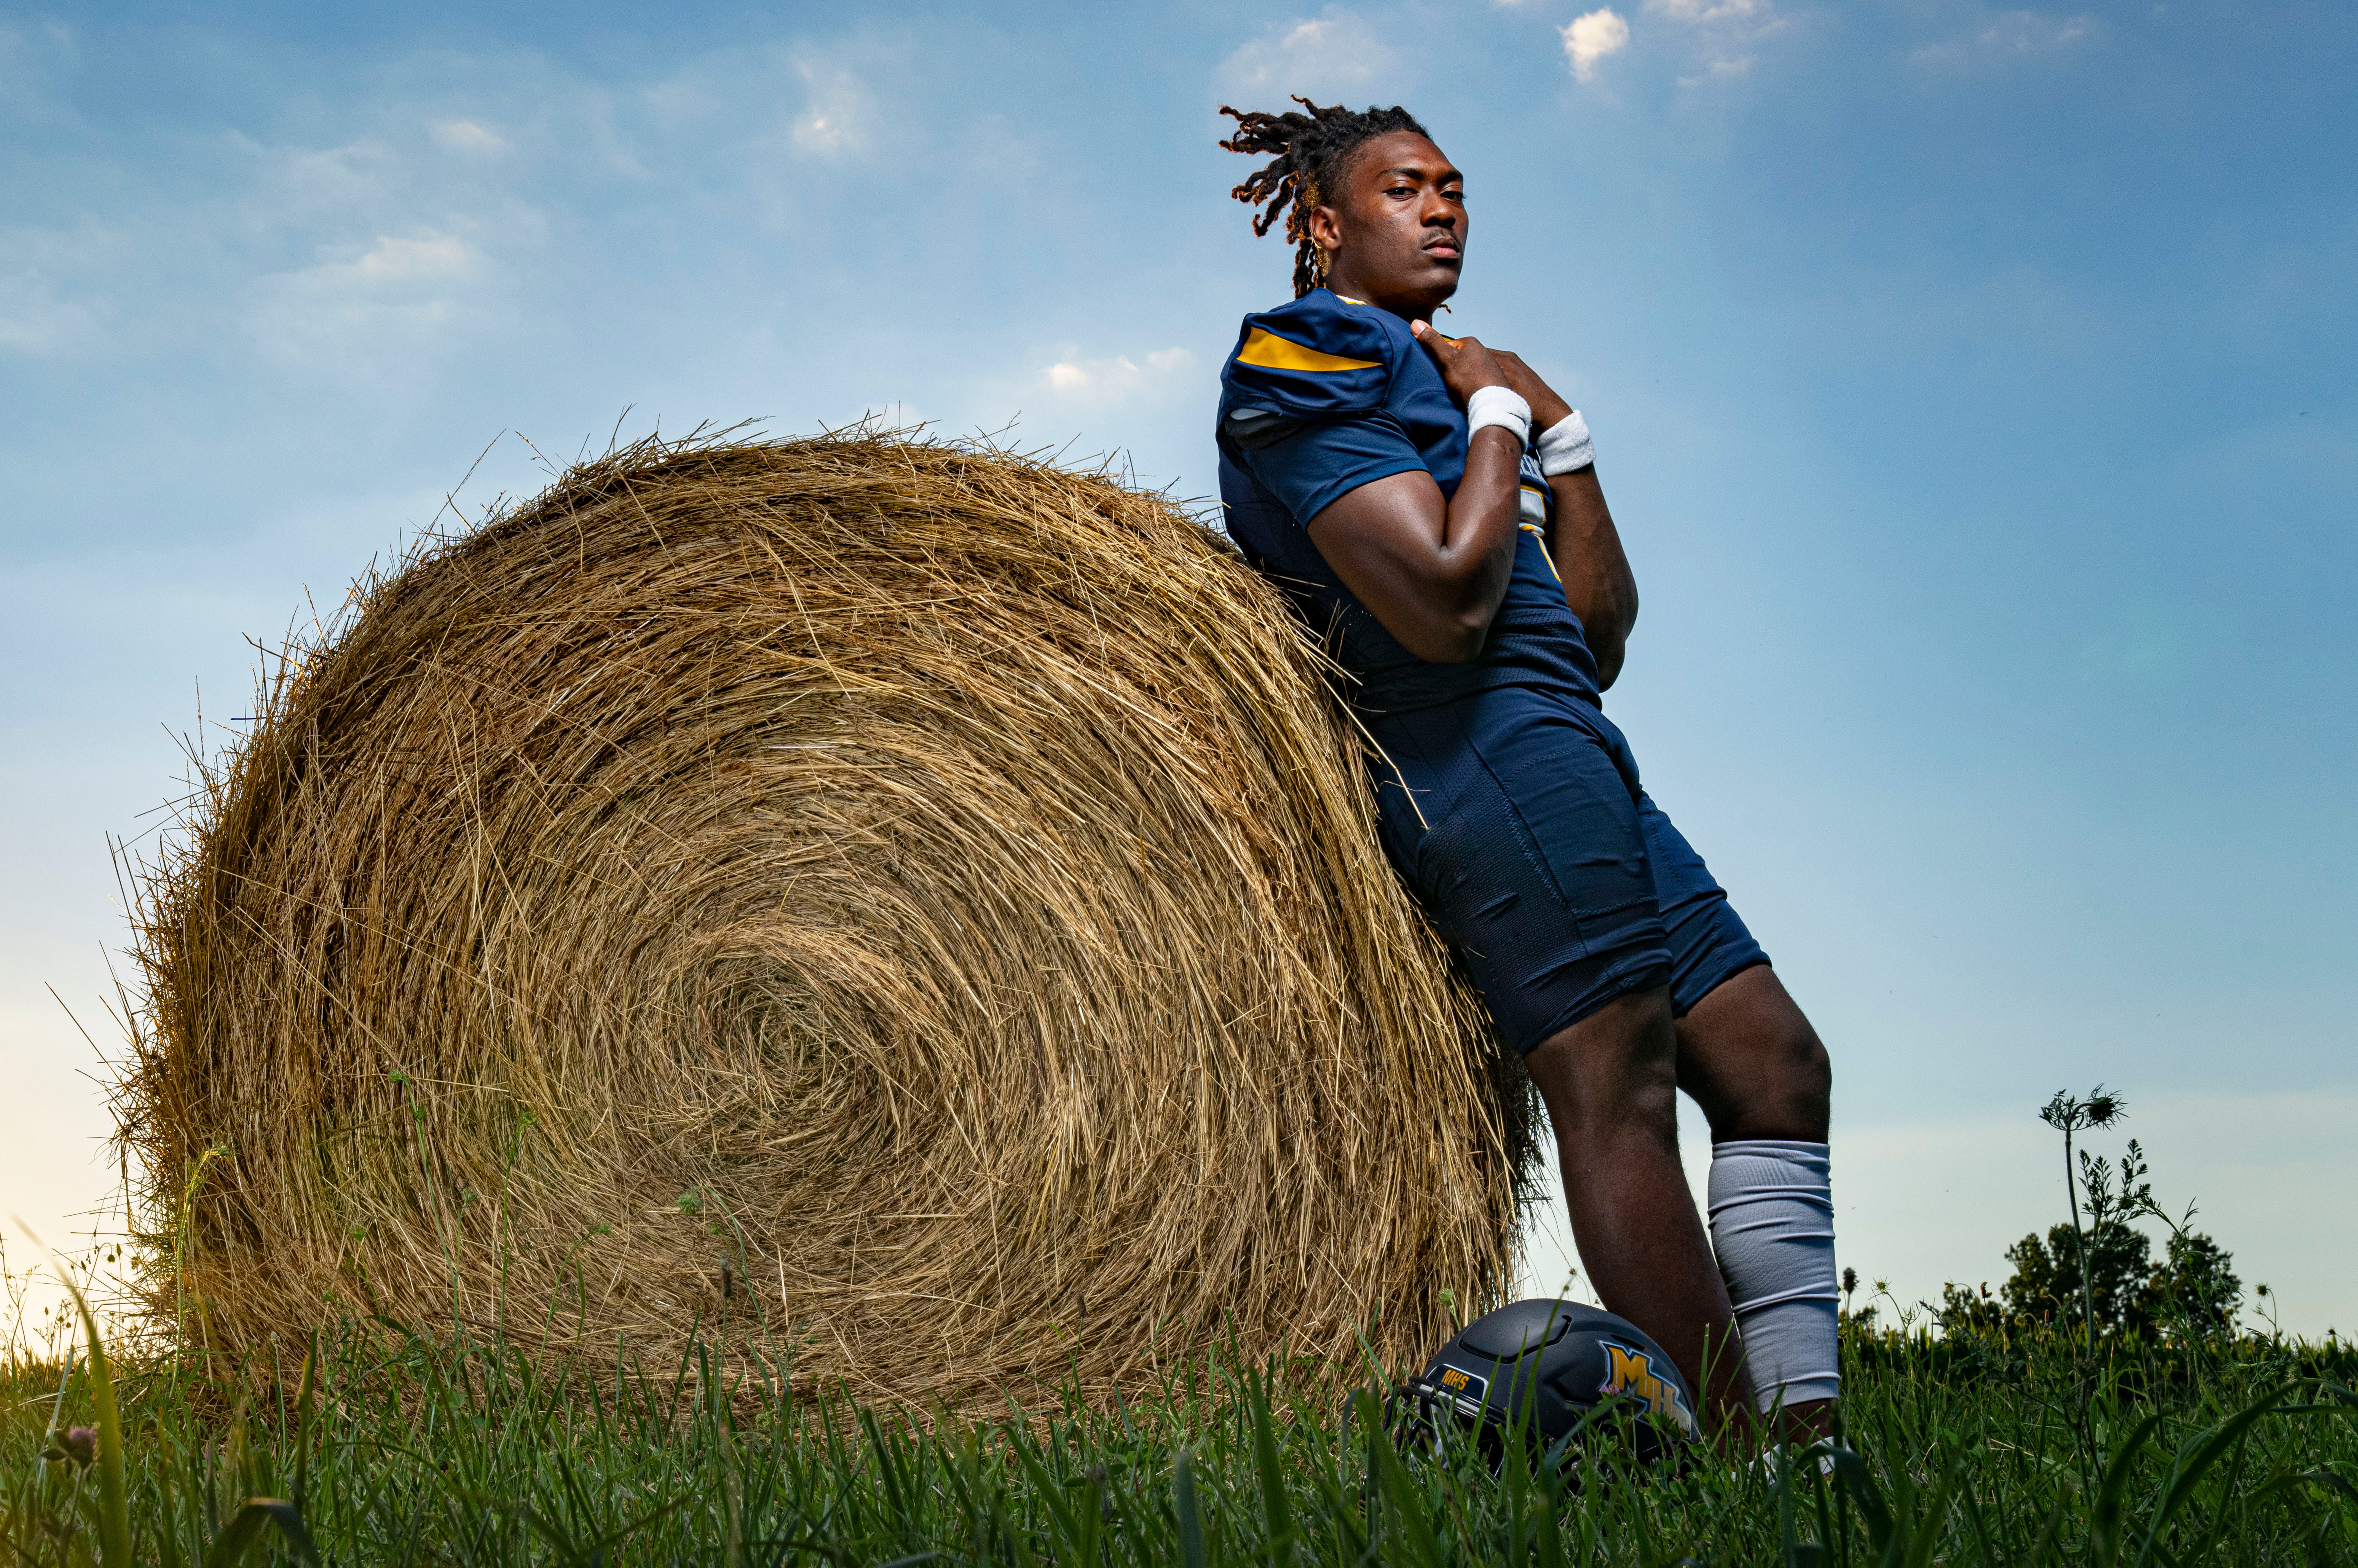 Mooresville senior quarterback Nick Patterson (9) pictured Tuesday July 12, 2022 in the Mooresville countryside.